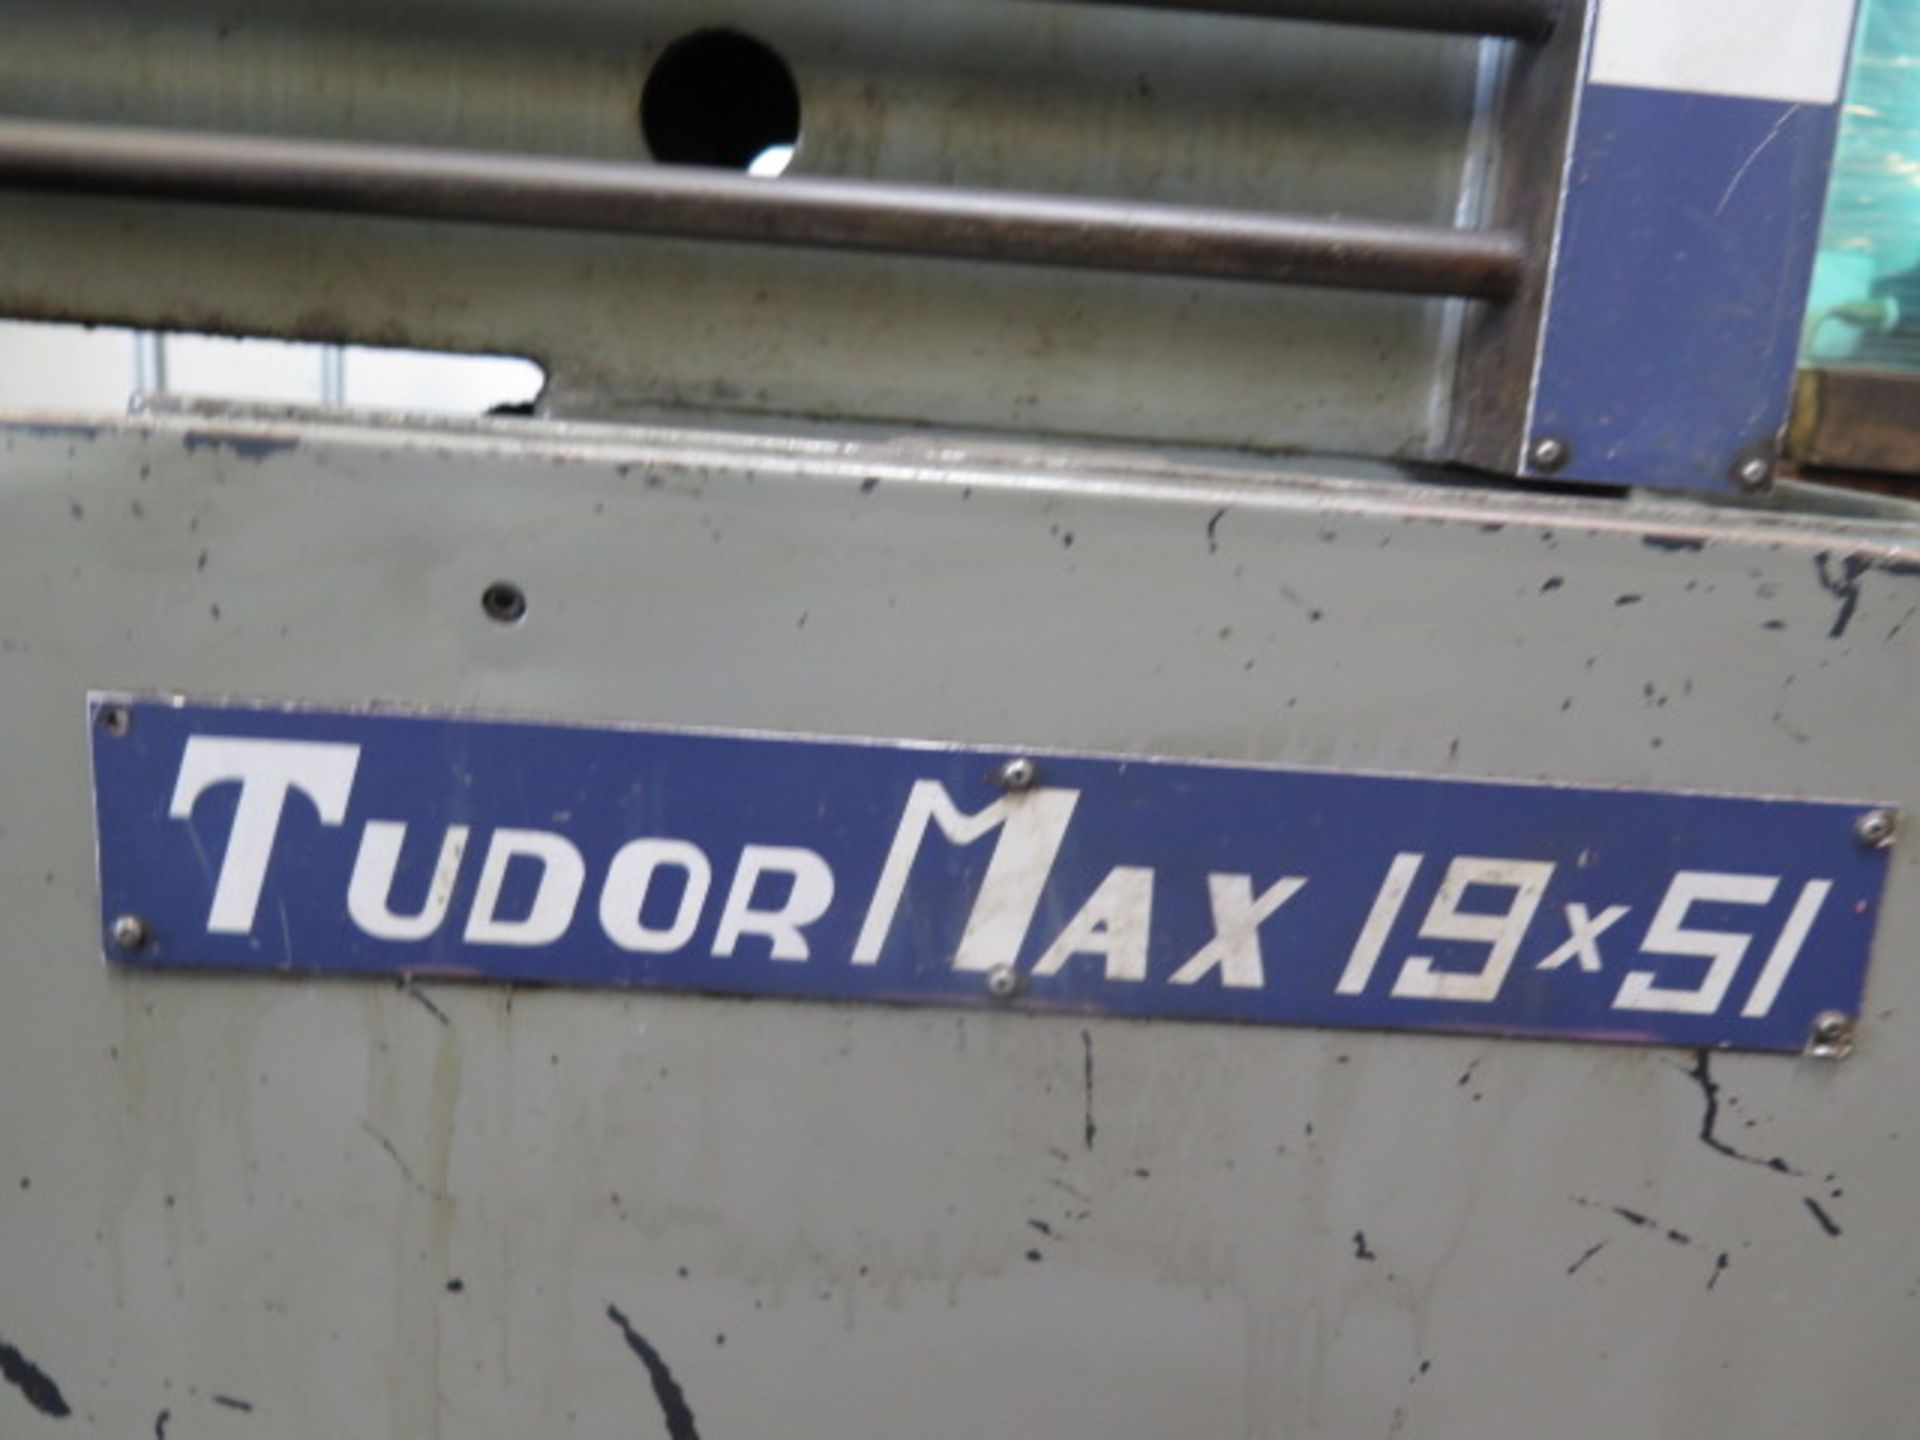 Tuda TudoMax 19X51 19” x 51” Geared Head Bed Lathe w/ 25-1800 RPM, 3” Thru Spindle Bore, SOLD AS IS - Image 16 of 17